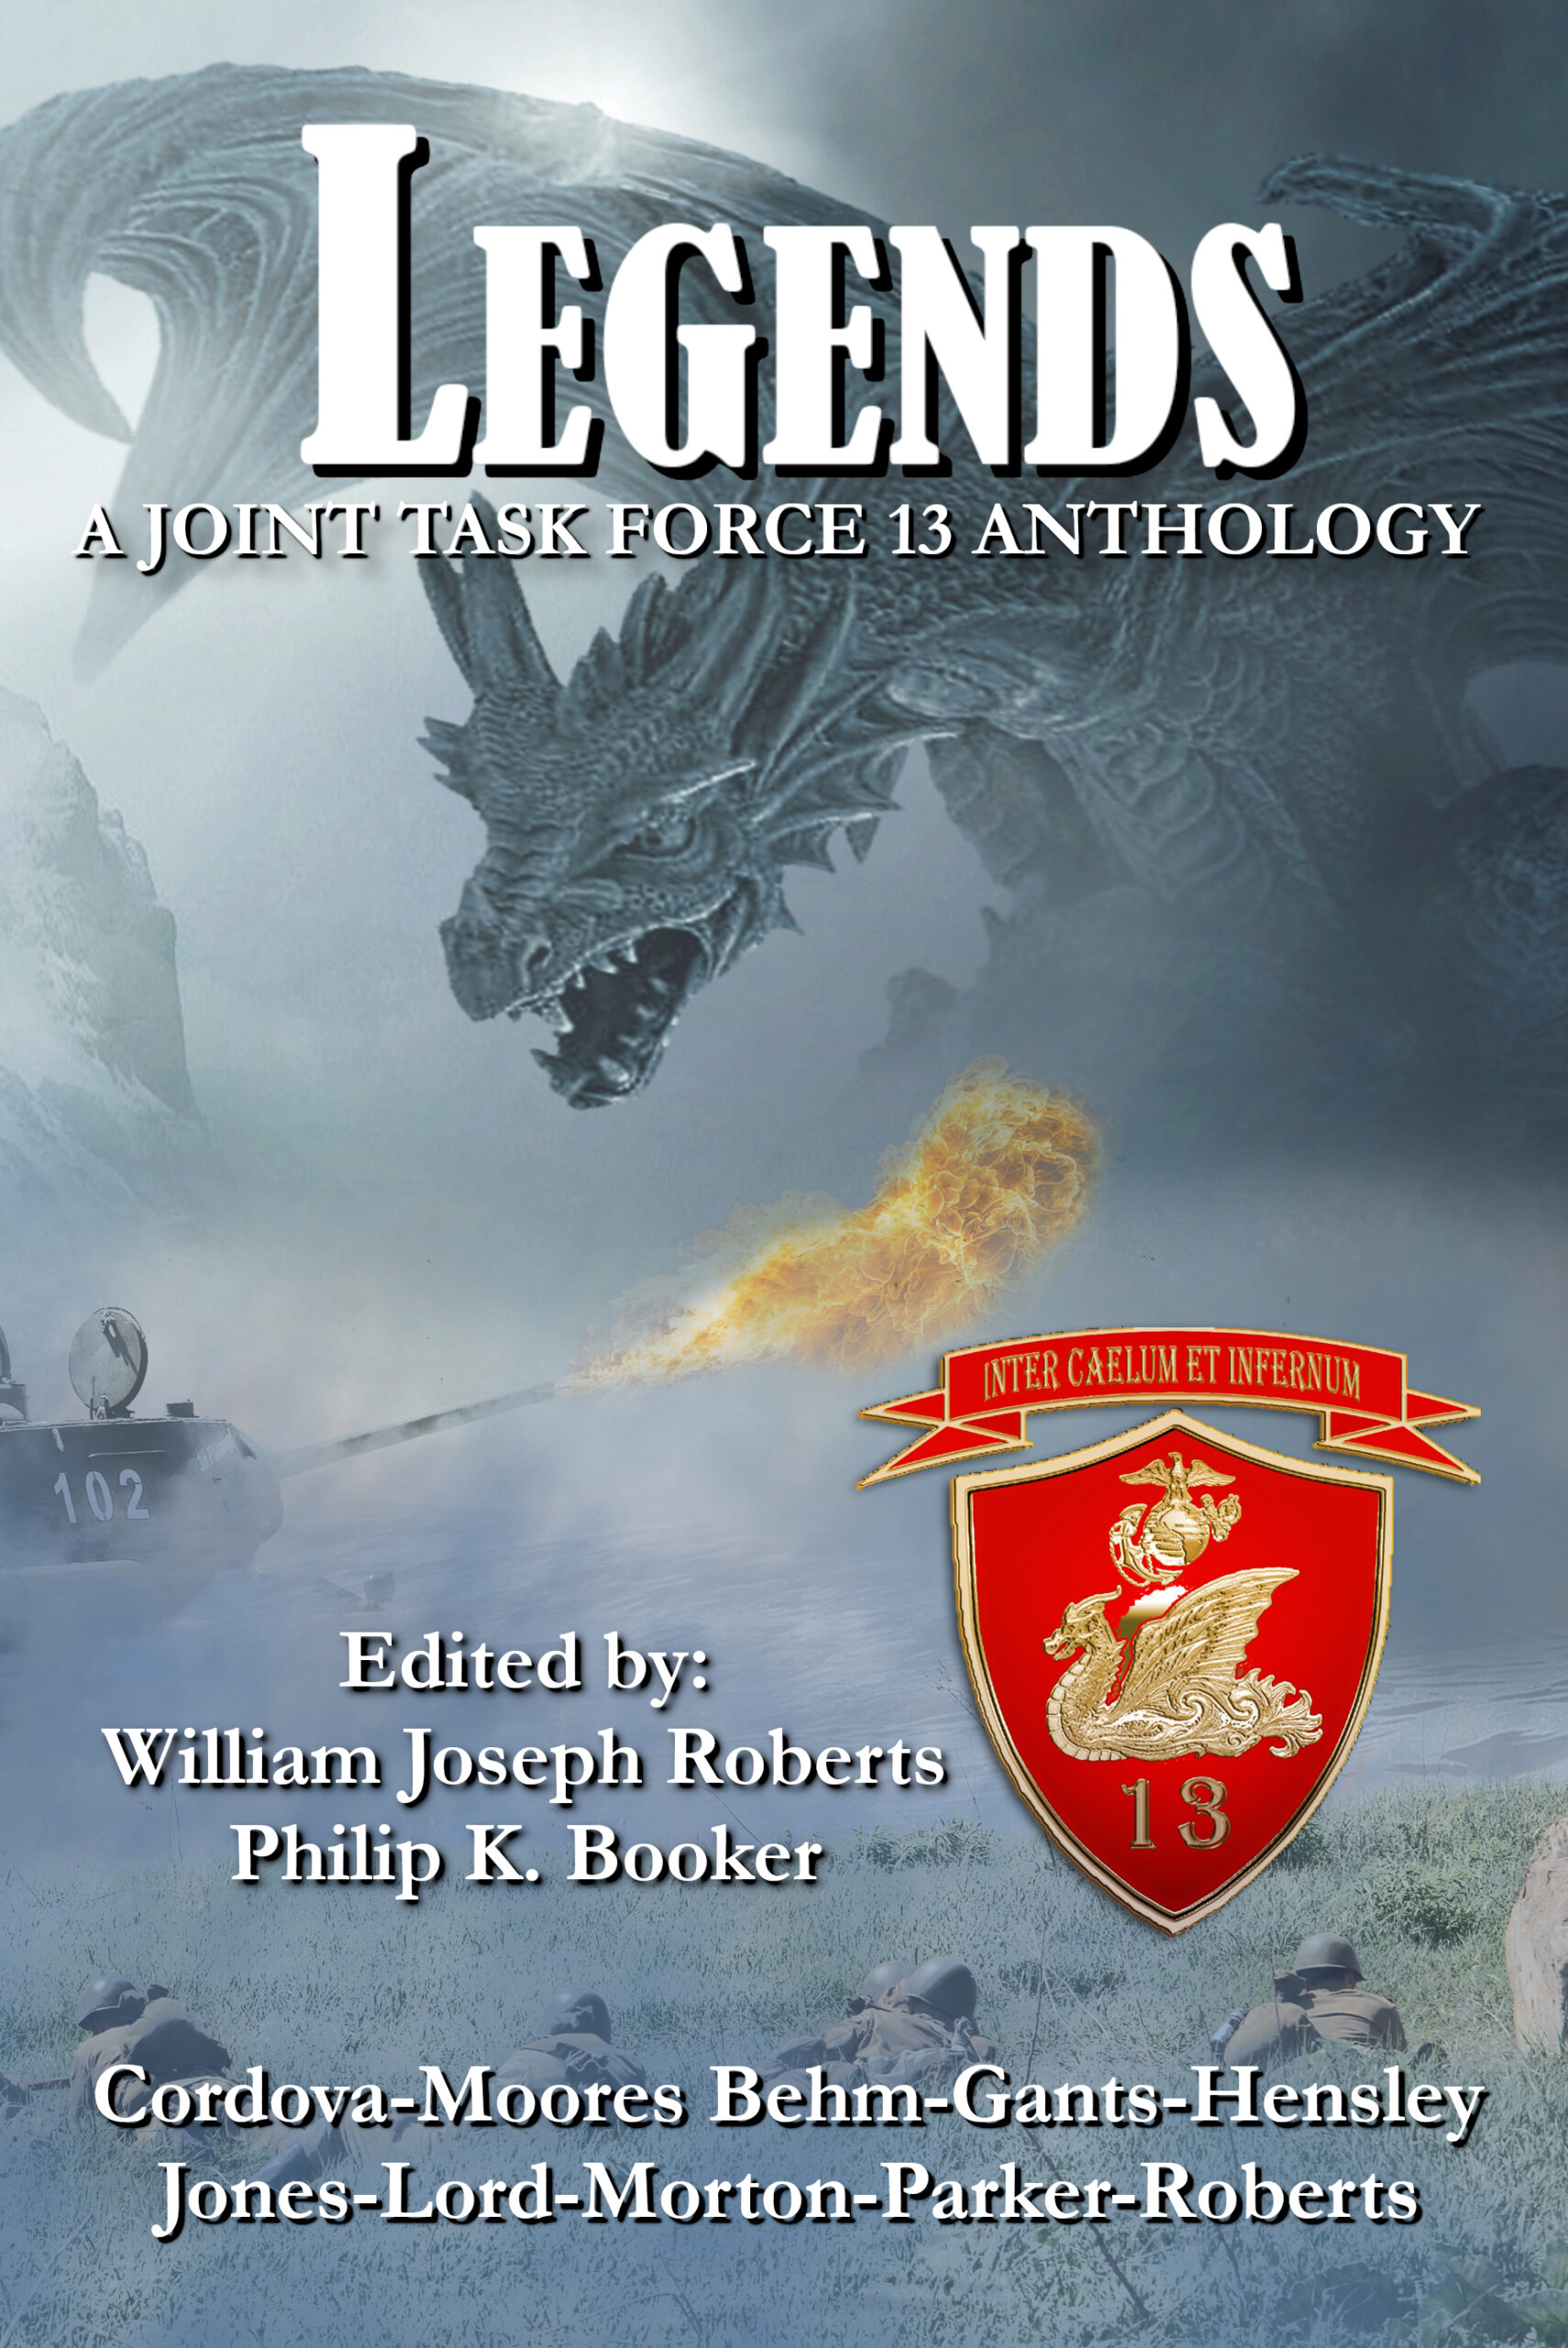 Do you want something new? JTF-13 Legends is Live on Amazon! The Monster Hunt Begins!